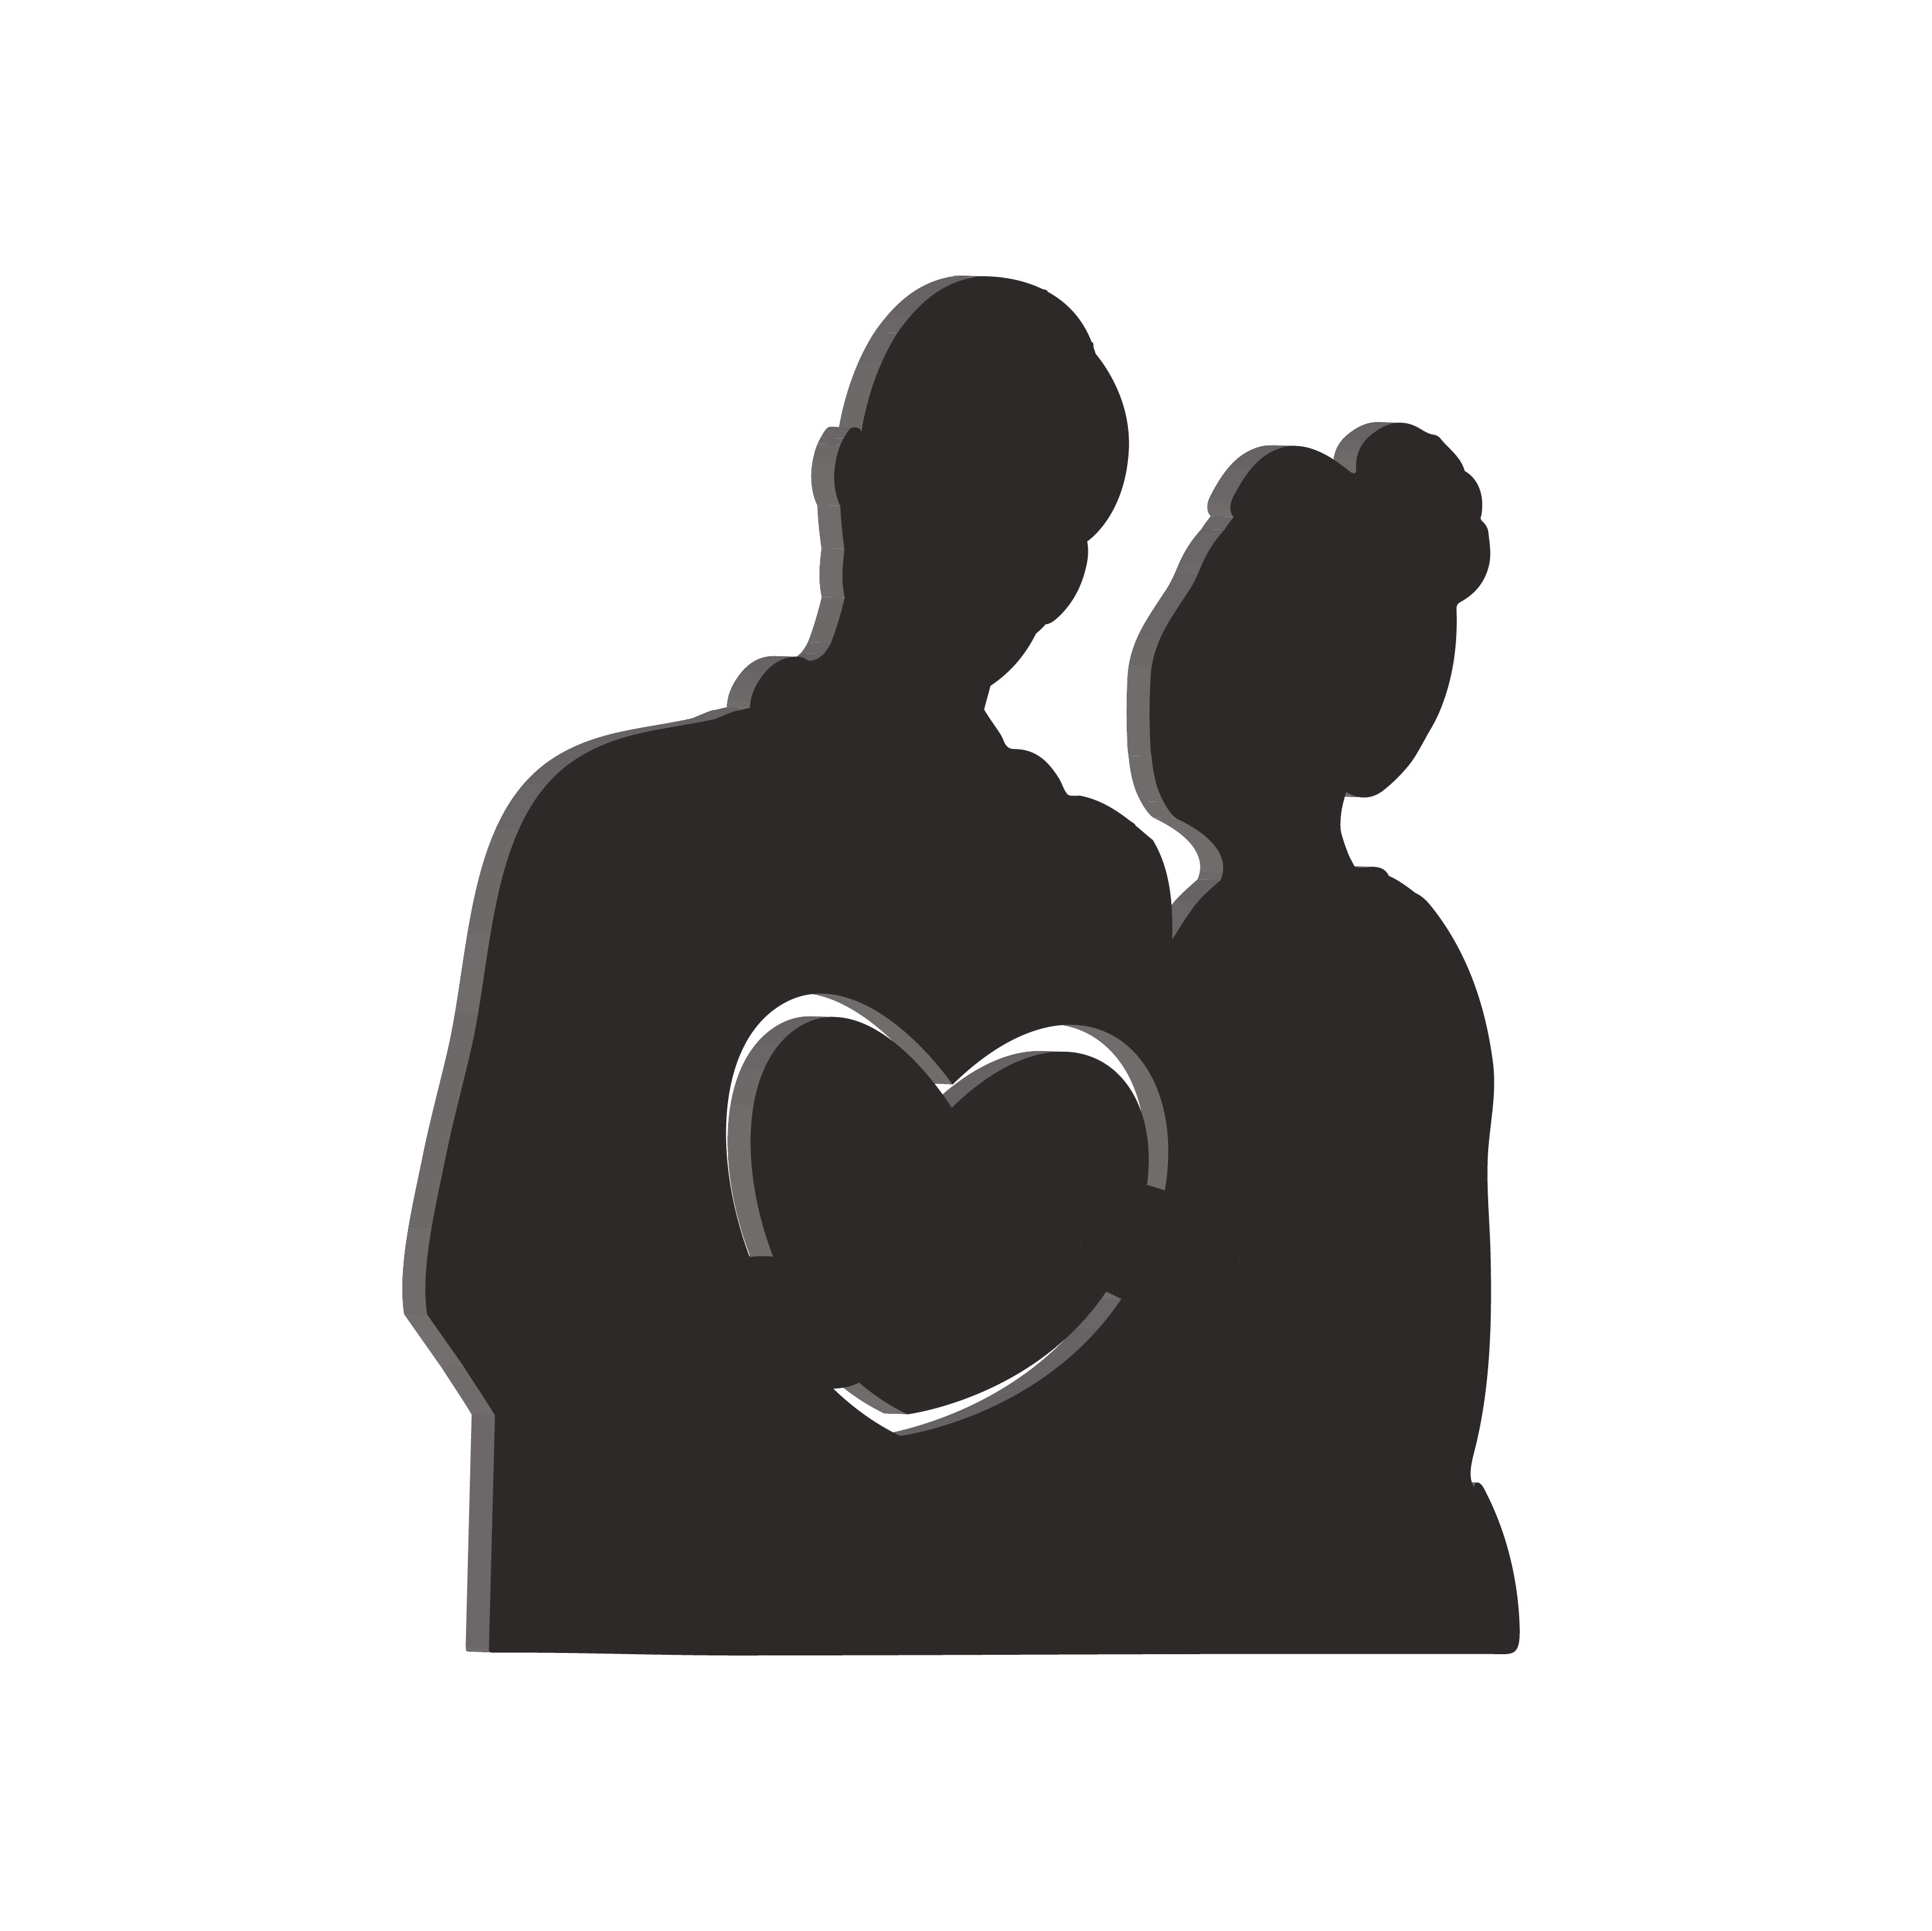 Couple Holding Heart Black Engineered Wood Wall Art Cutout, Ready To Hang Home Decor 4